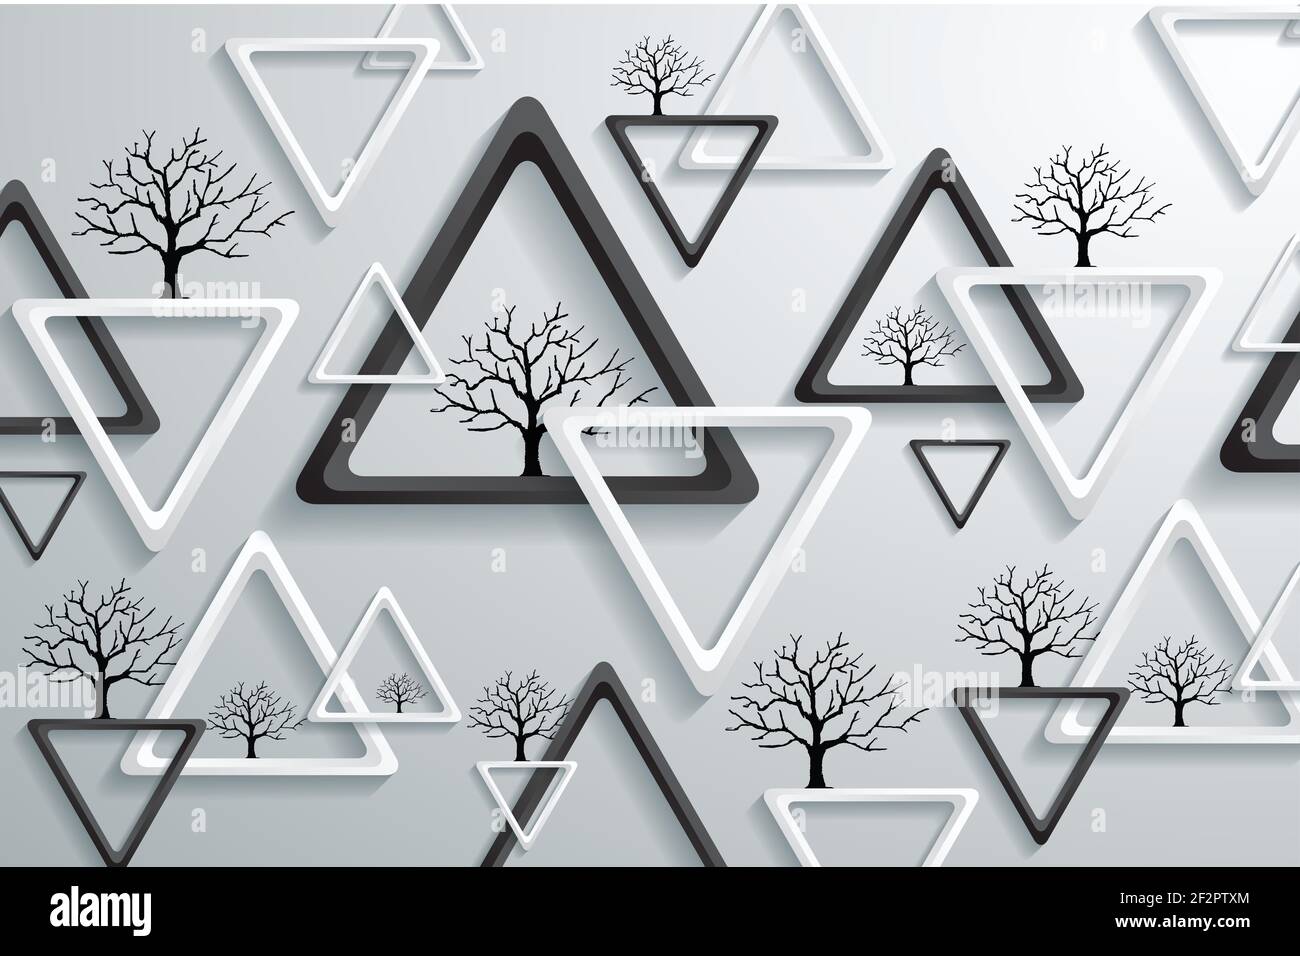 Black And White 3d Mural Wallpaper Image Num 19